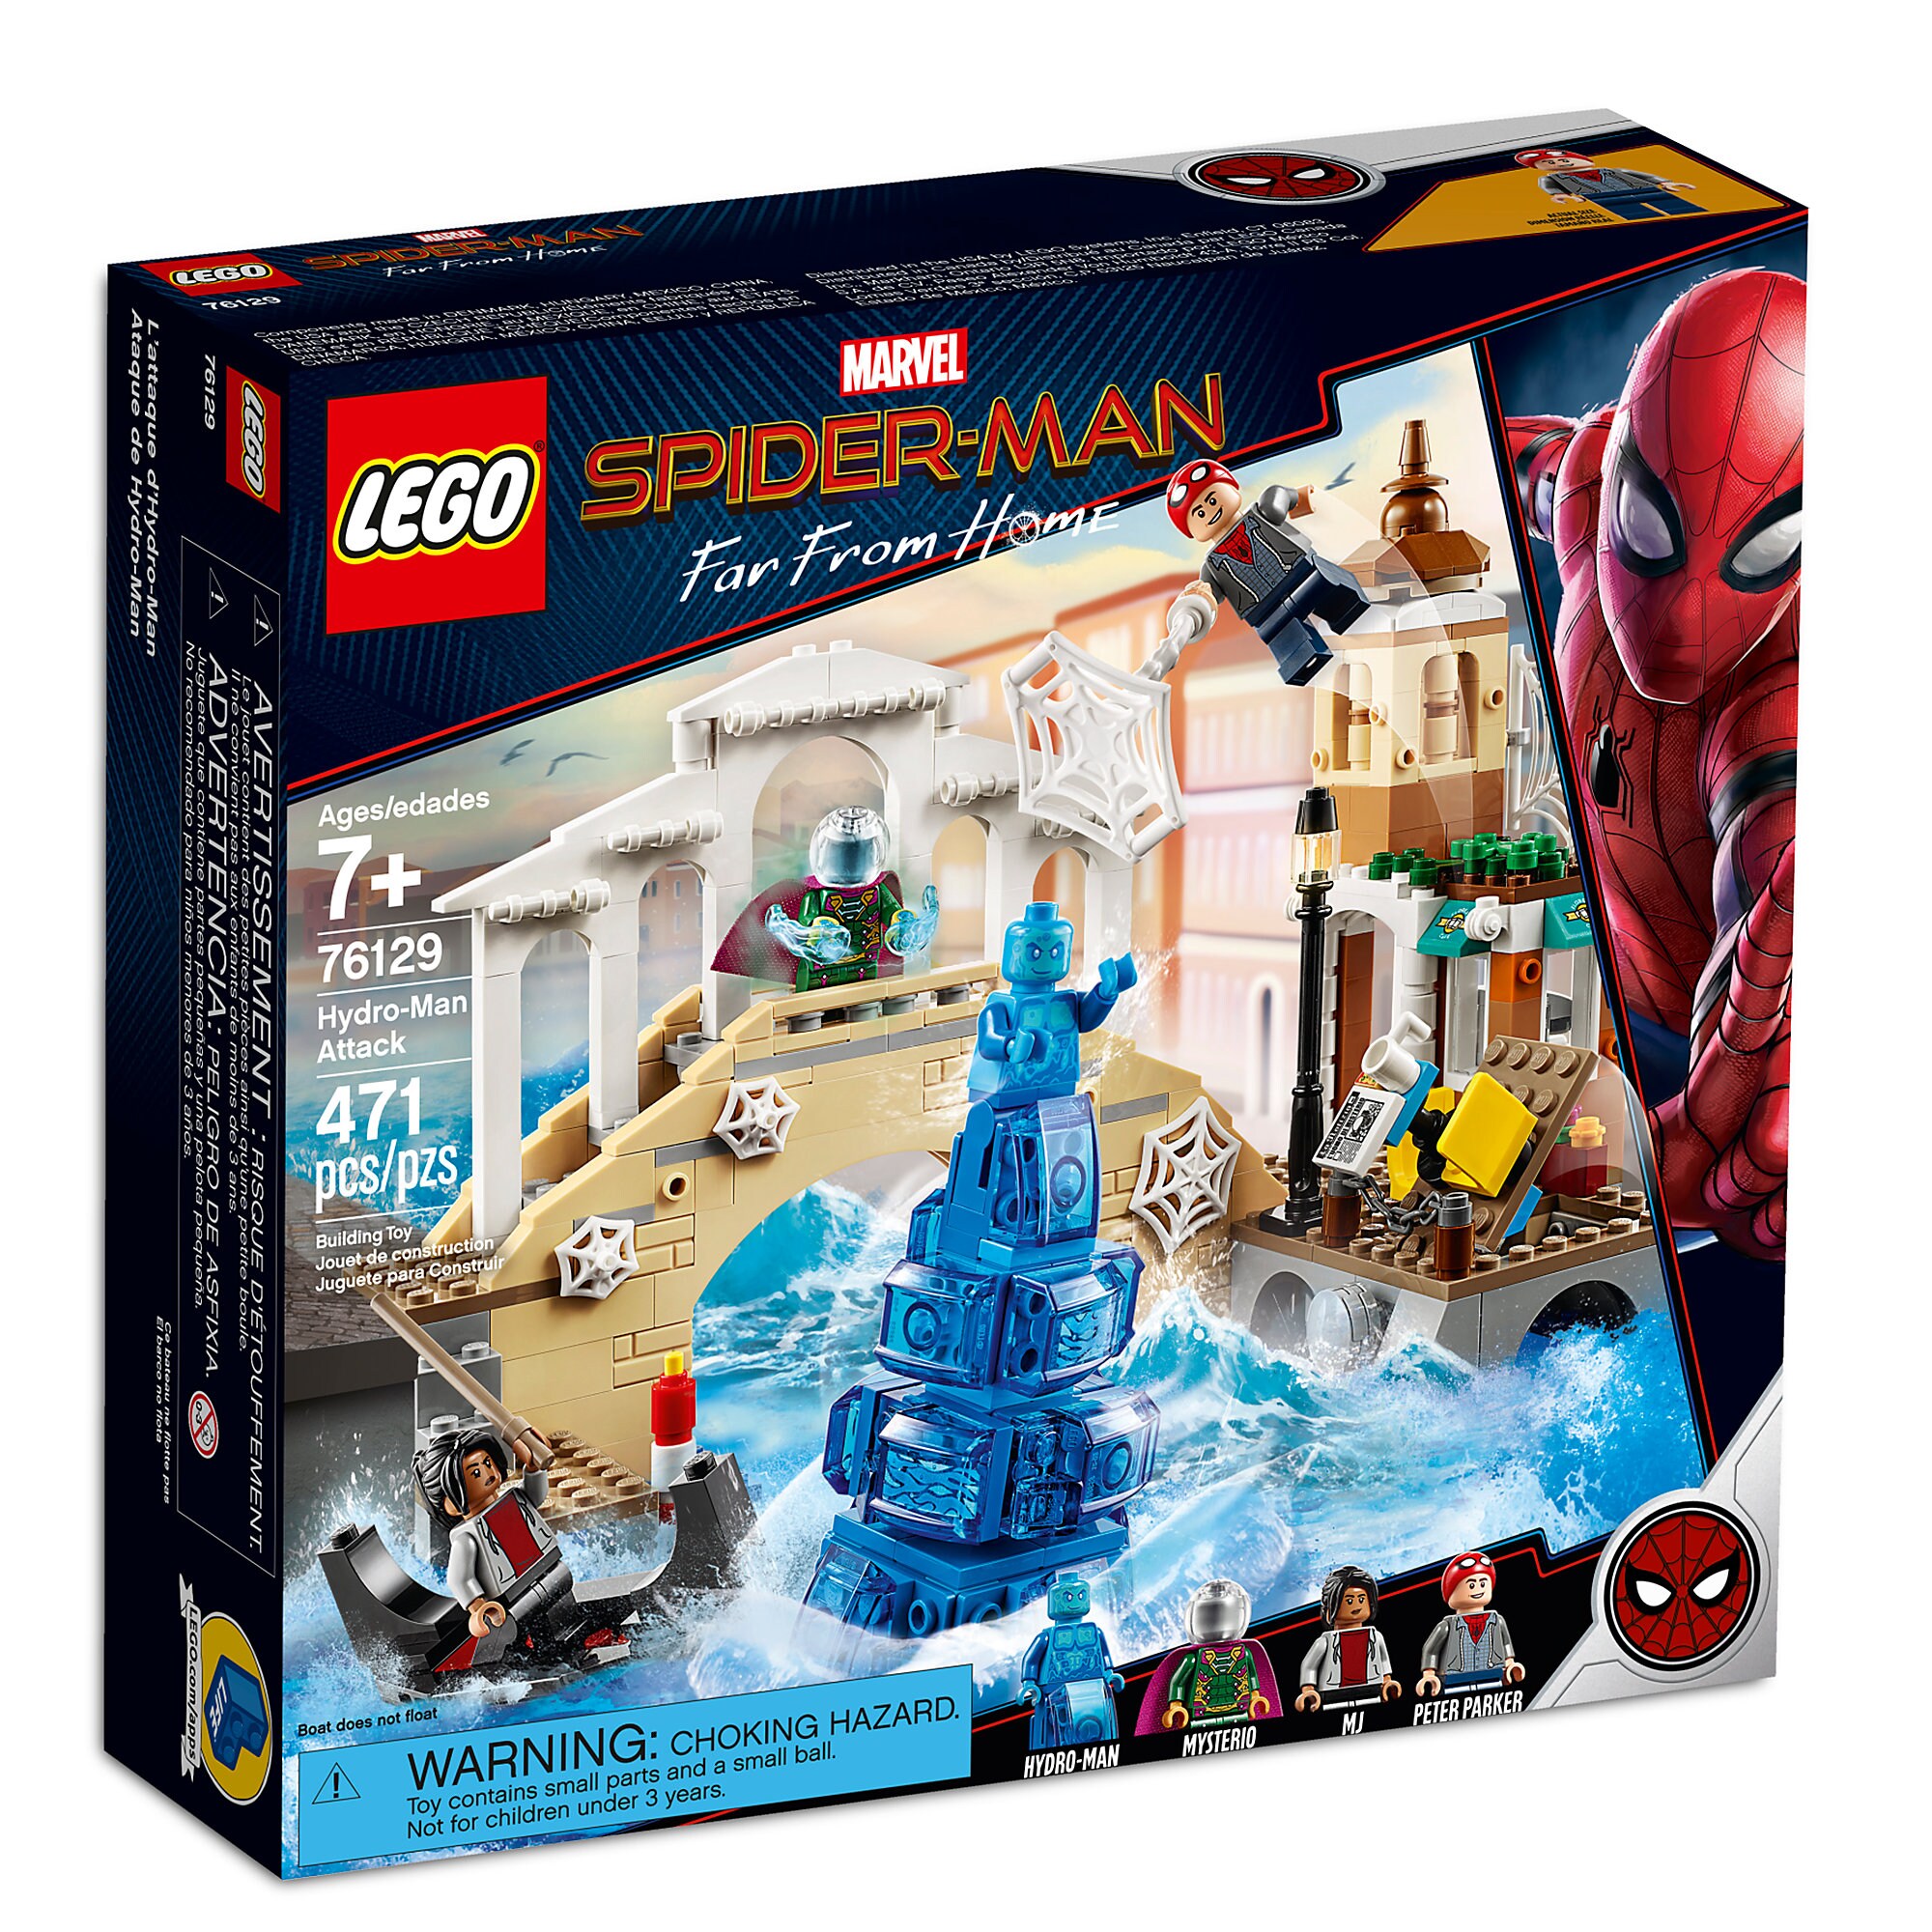 Spider-Man: Far From Home Hydro-Man Attack Play Set by LEGO